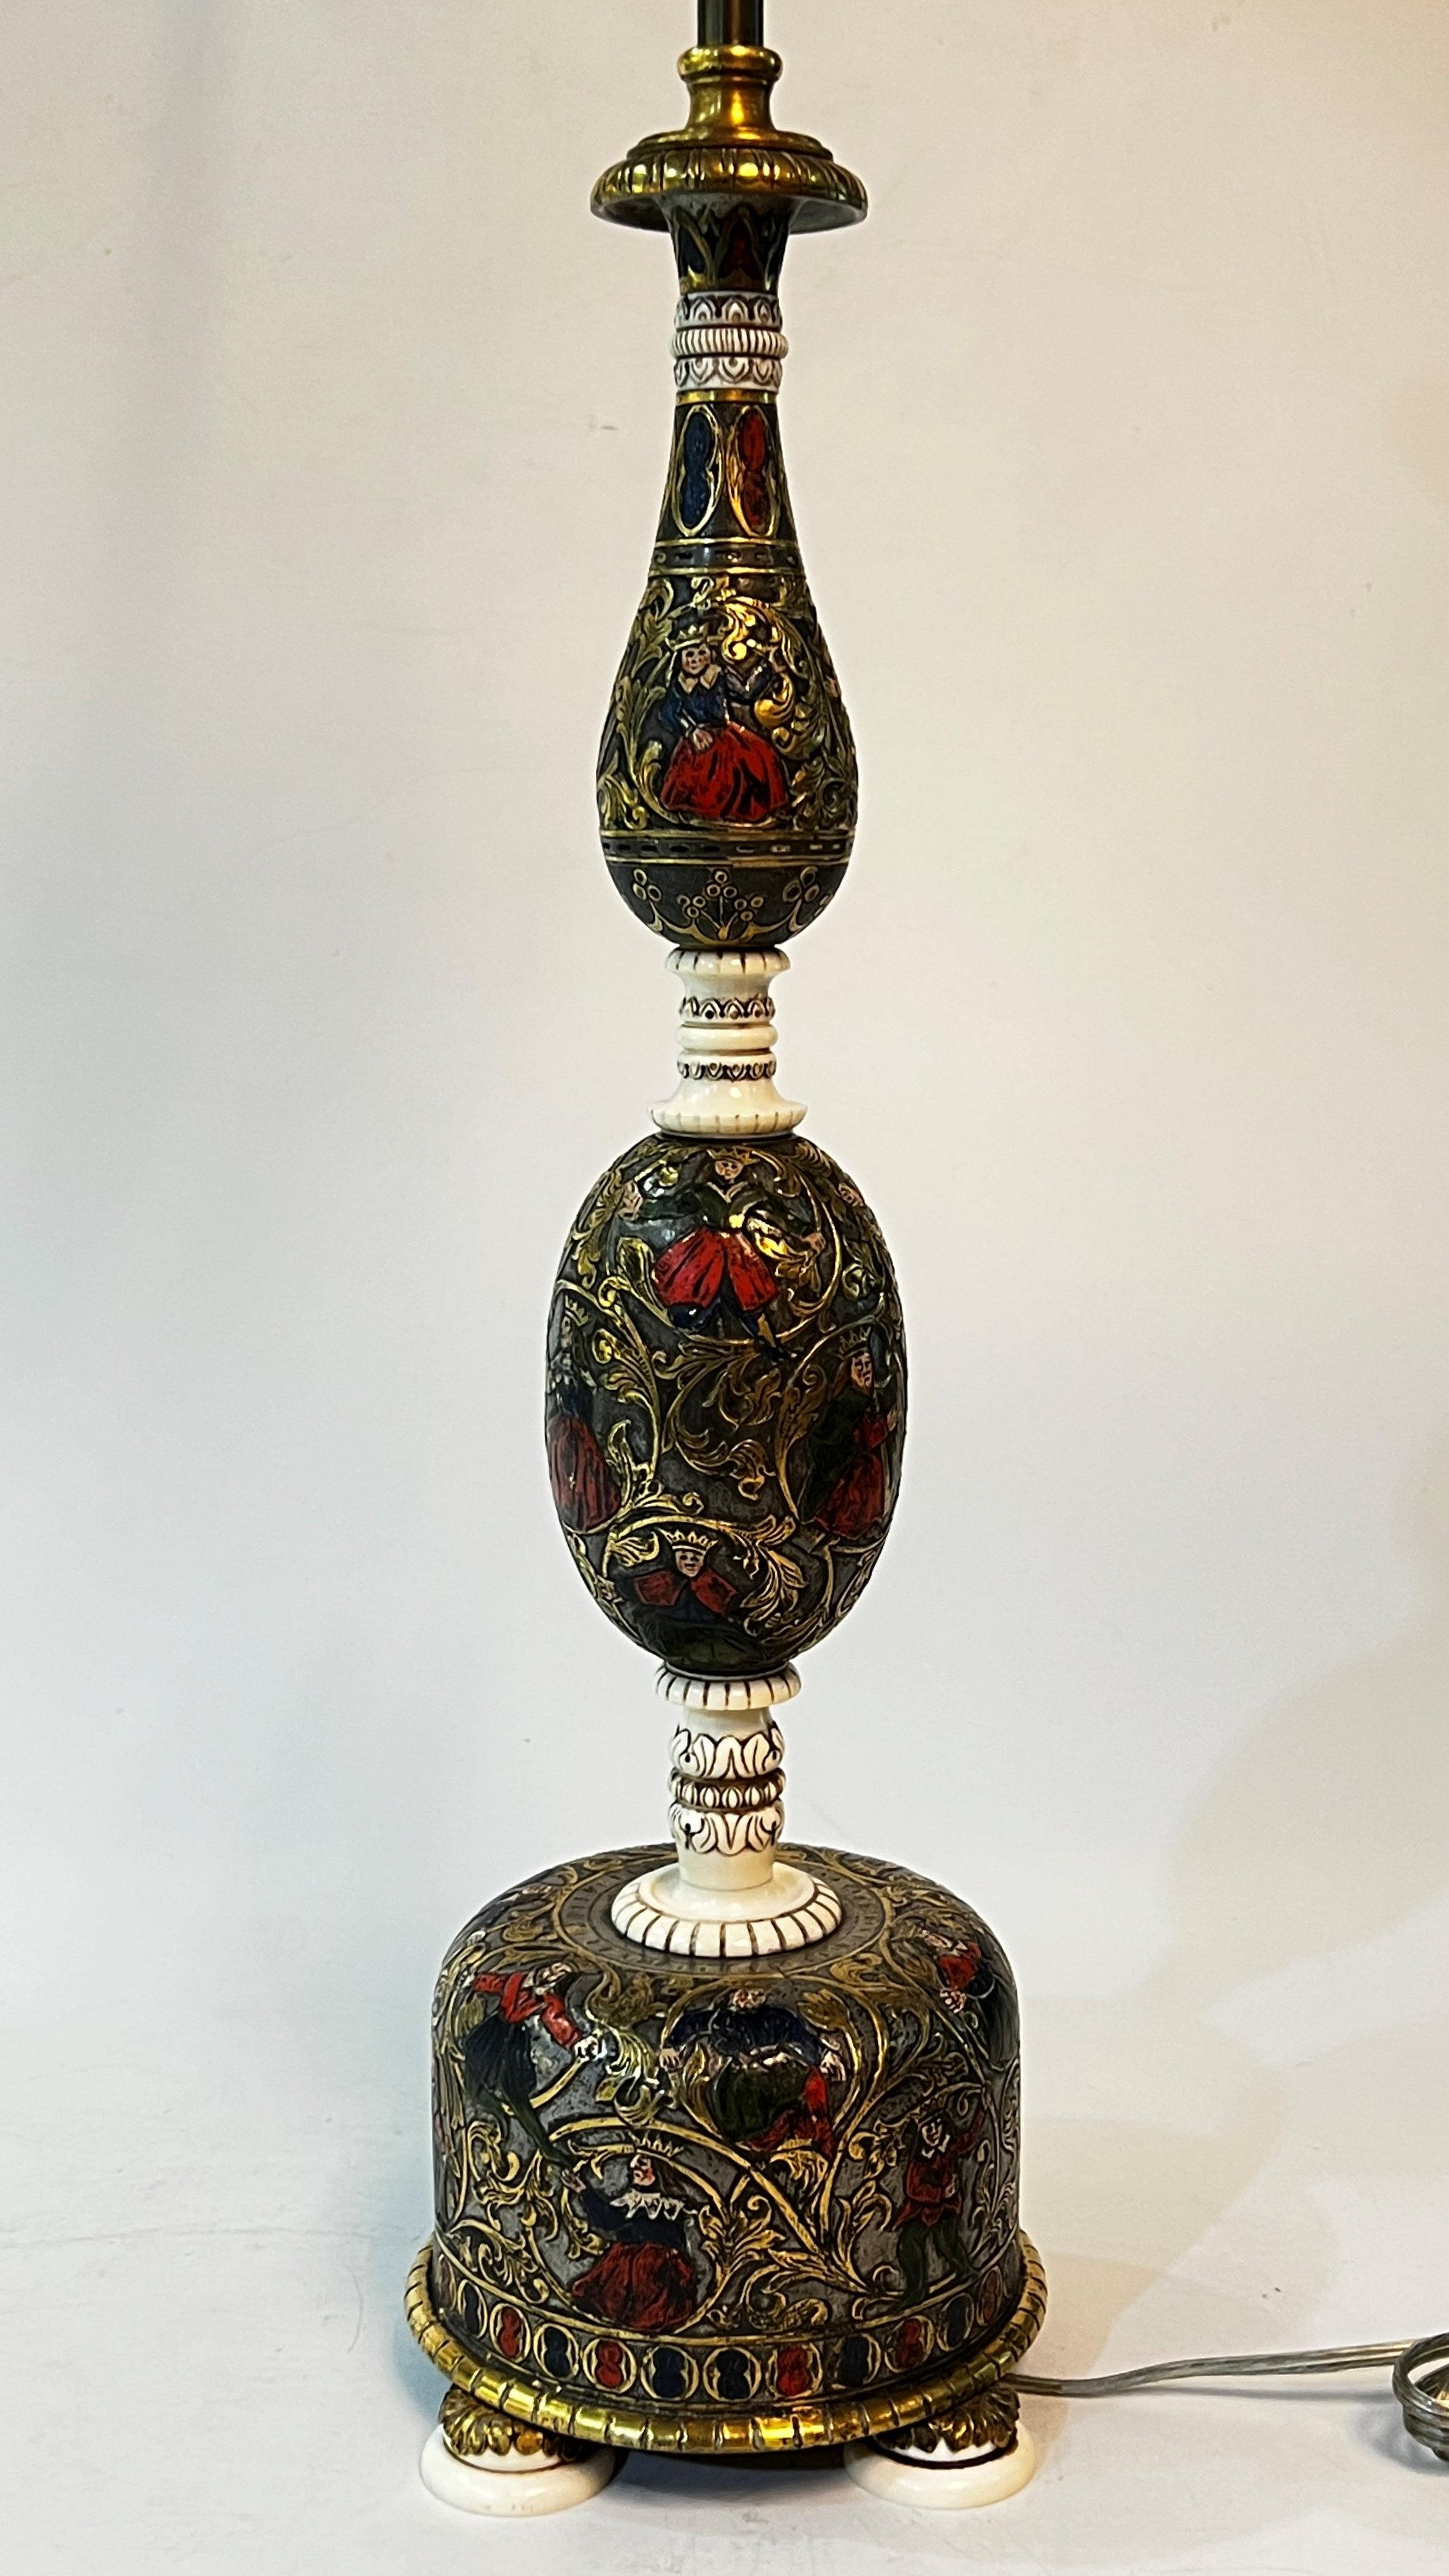 American Renaissance Revival Enameled Bronze and Ivory Table Lamp by E.F. Caldwell For Sale